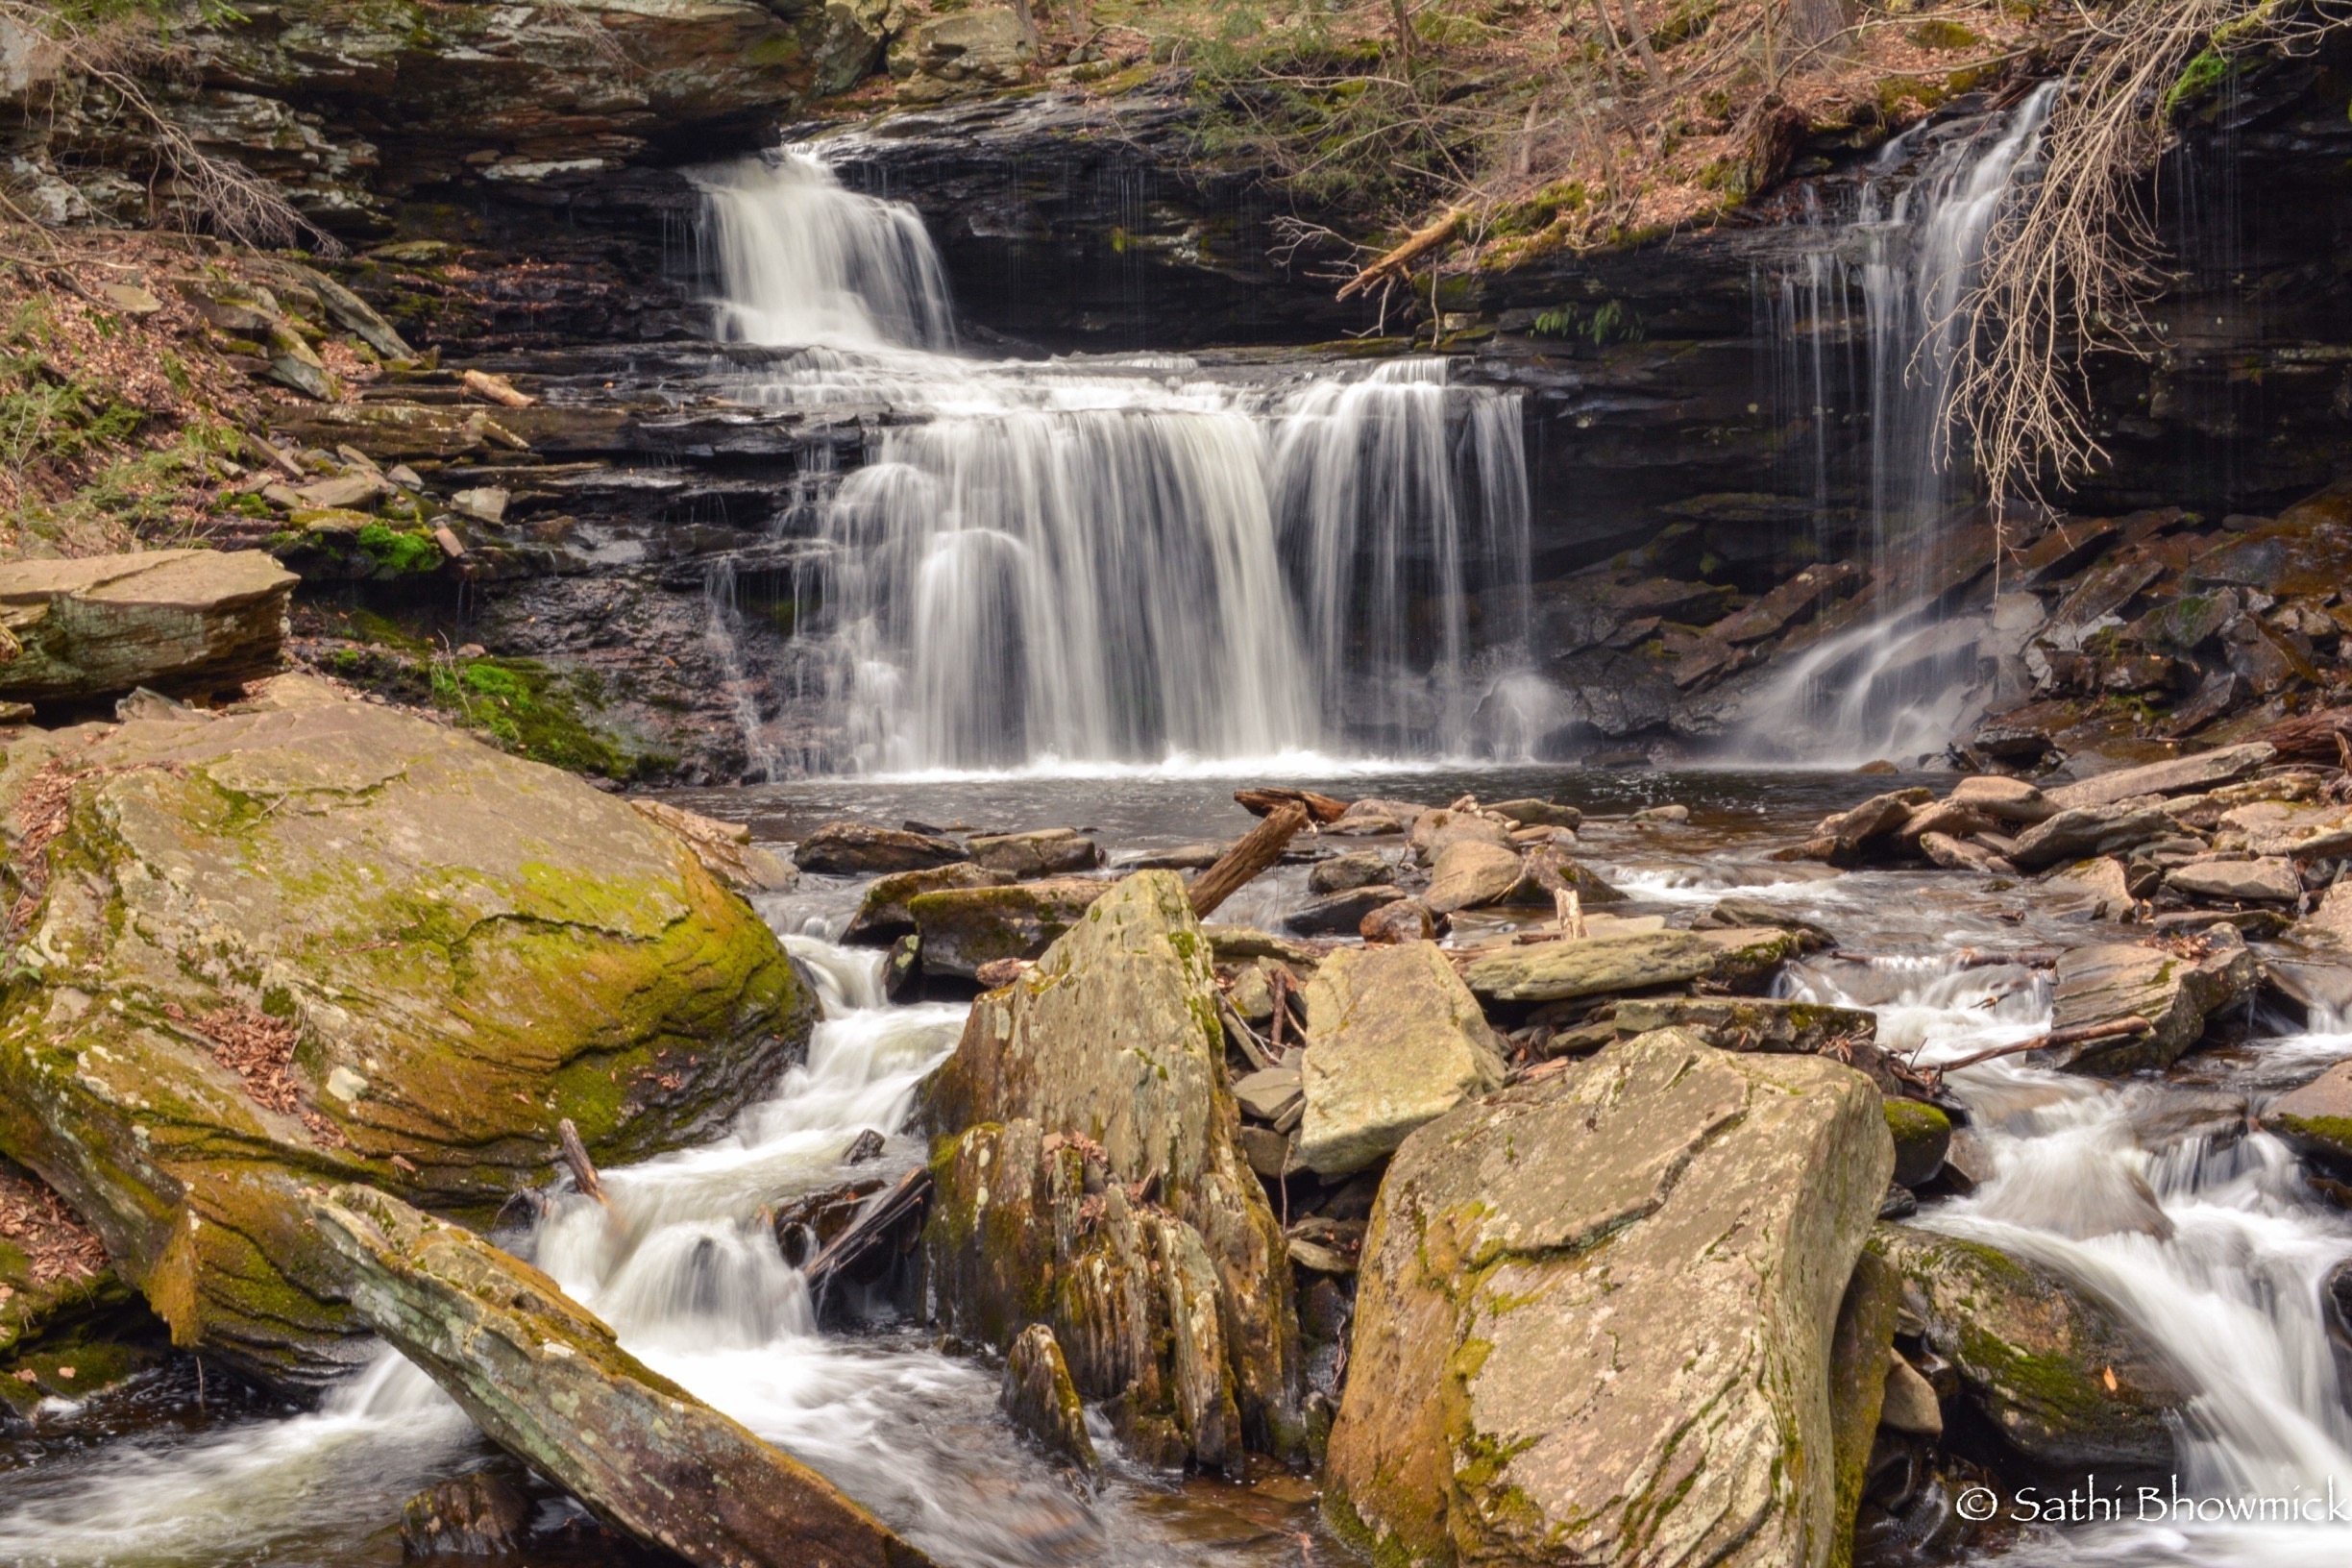 Ricketts Glen harbors Glens Natural Area, a National Natural Landmark. Take the Falls Trail and explore the Glens, which boasts a series of wild, free-flowing waterfalls, each cascading through rock-strewn clefts in this ancient hillside. The 94-foot Ganoga Falls is the highest of 22 named waterfalls. Old growth timber and diverse wildlife add to the scenic area. Ricketts Glen State Park is one of the most scenic areas in Pennsylvania. #rickettsglen #rickettsglenstatepark #pennsylvania #summertravels #summer #summerhikes #waterfall #waterfalls #igwaterfalls #nature #naturegram #flowingwater #igmyshot #ig_newtag #ignature #hiking #hikingadventures #nikonphotography ##nikontop #topshots #nikonphoto #nikonphotographers #picoftheday #travelgirl #travelblog #travelbloggers #TakeAhike #AquaTrove